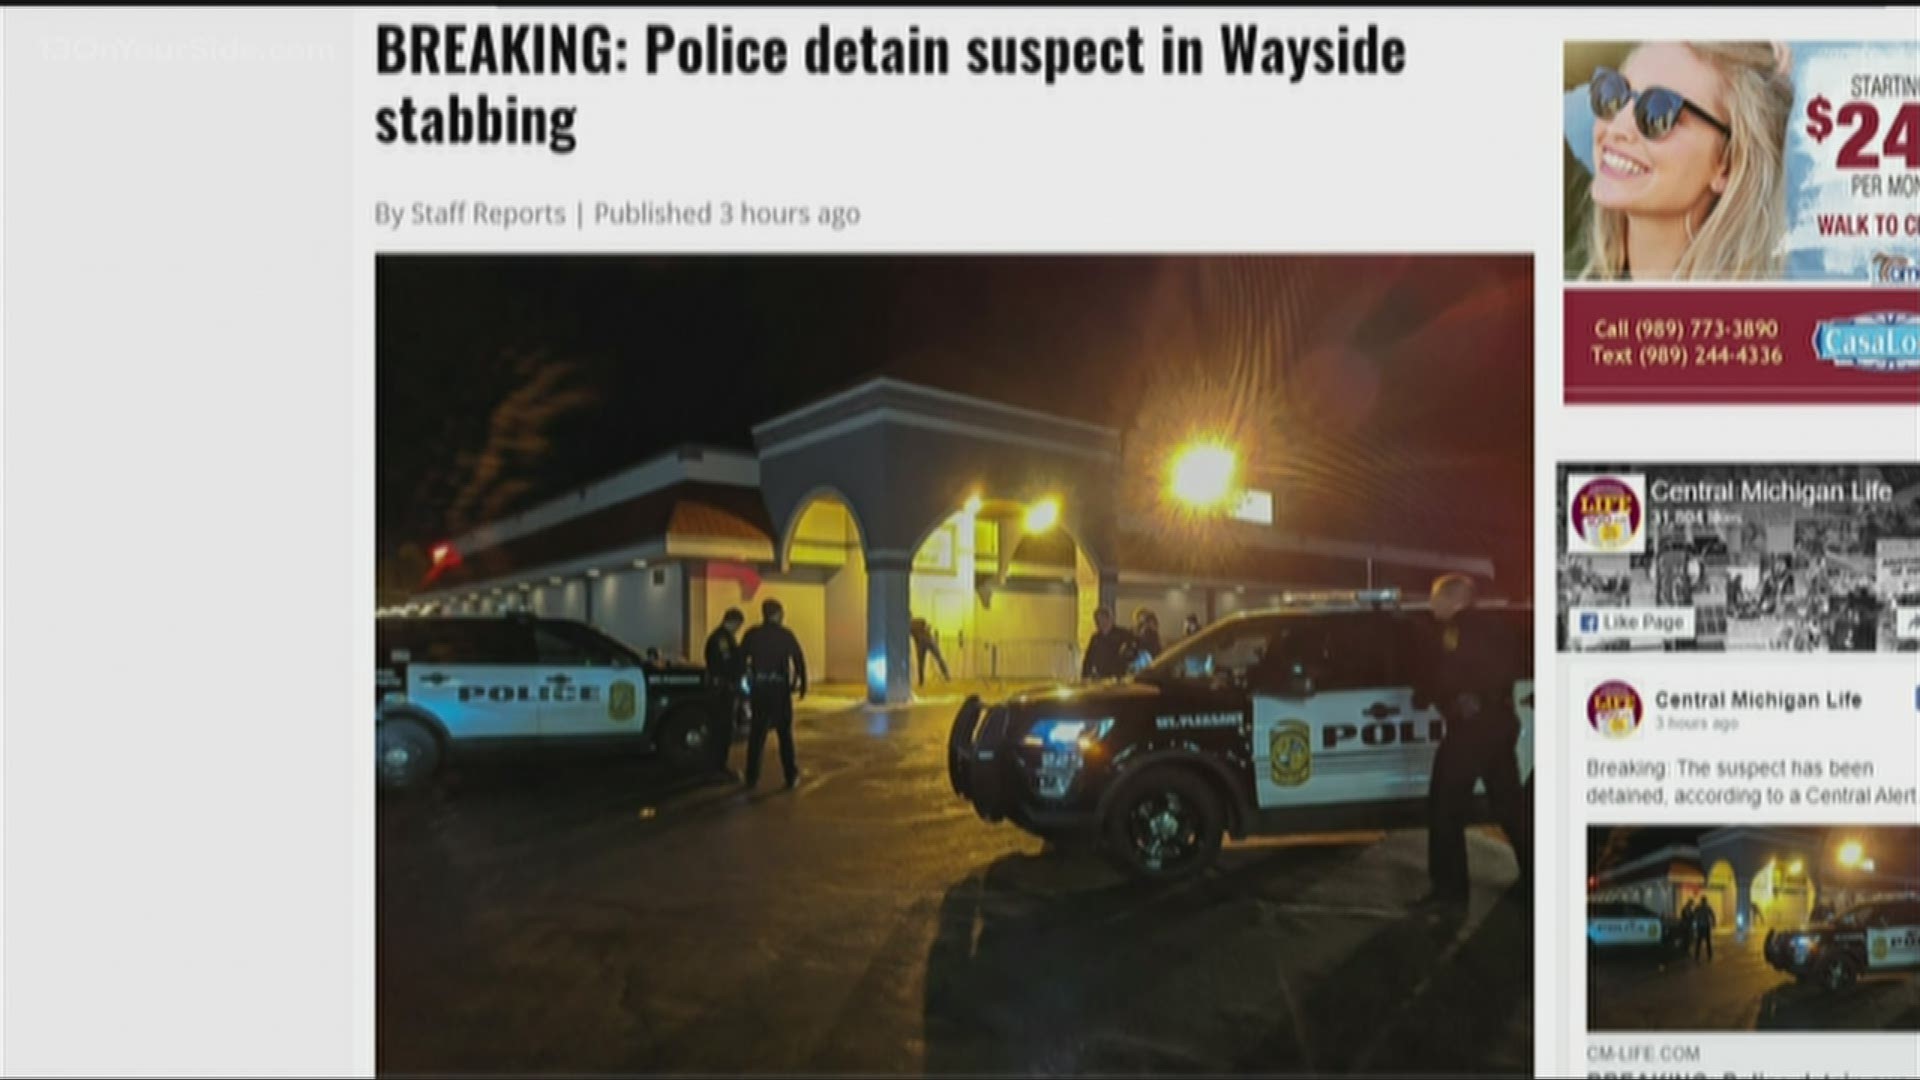 CM Life, the student newspaper is reporting that it happened at Wayside Central. CM Life says a suspect was detained in connection to the attack.